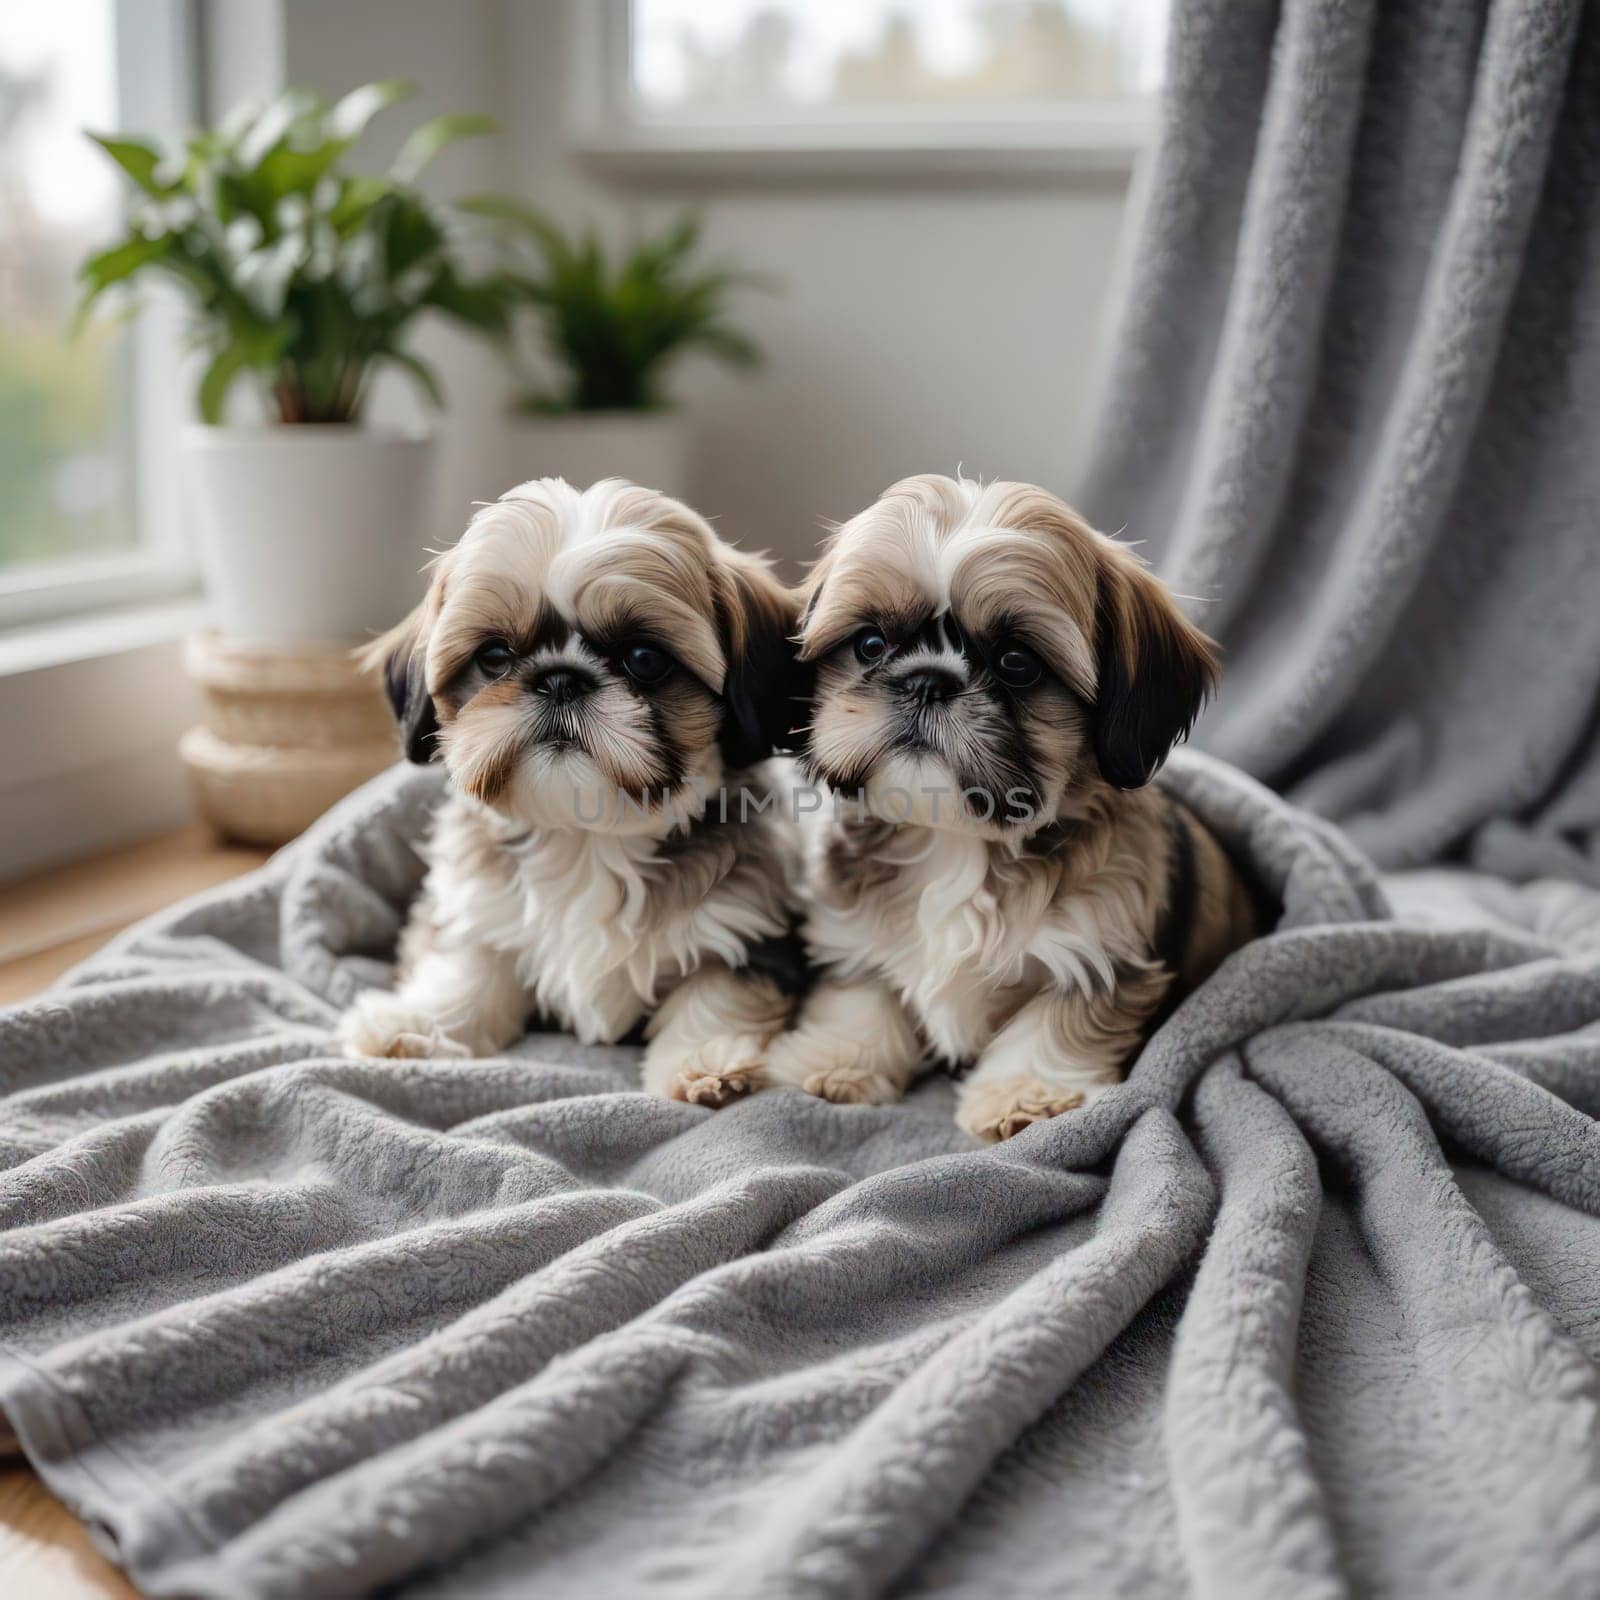 Adorable twin shih tzu puppies by the window.Blurred background by VeroDibe